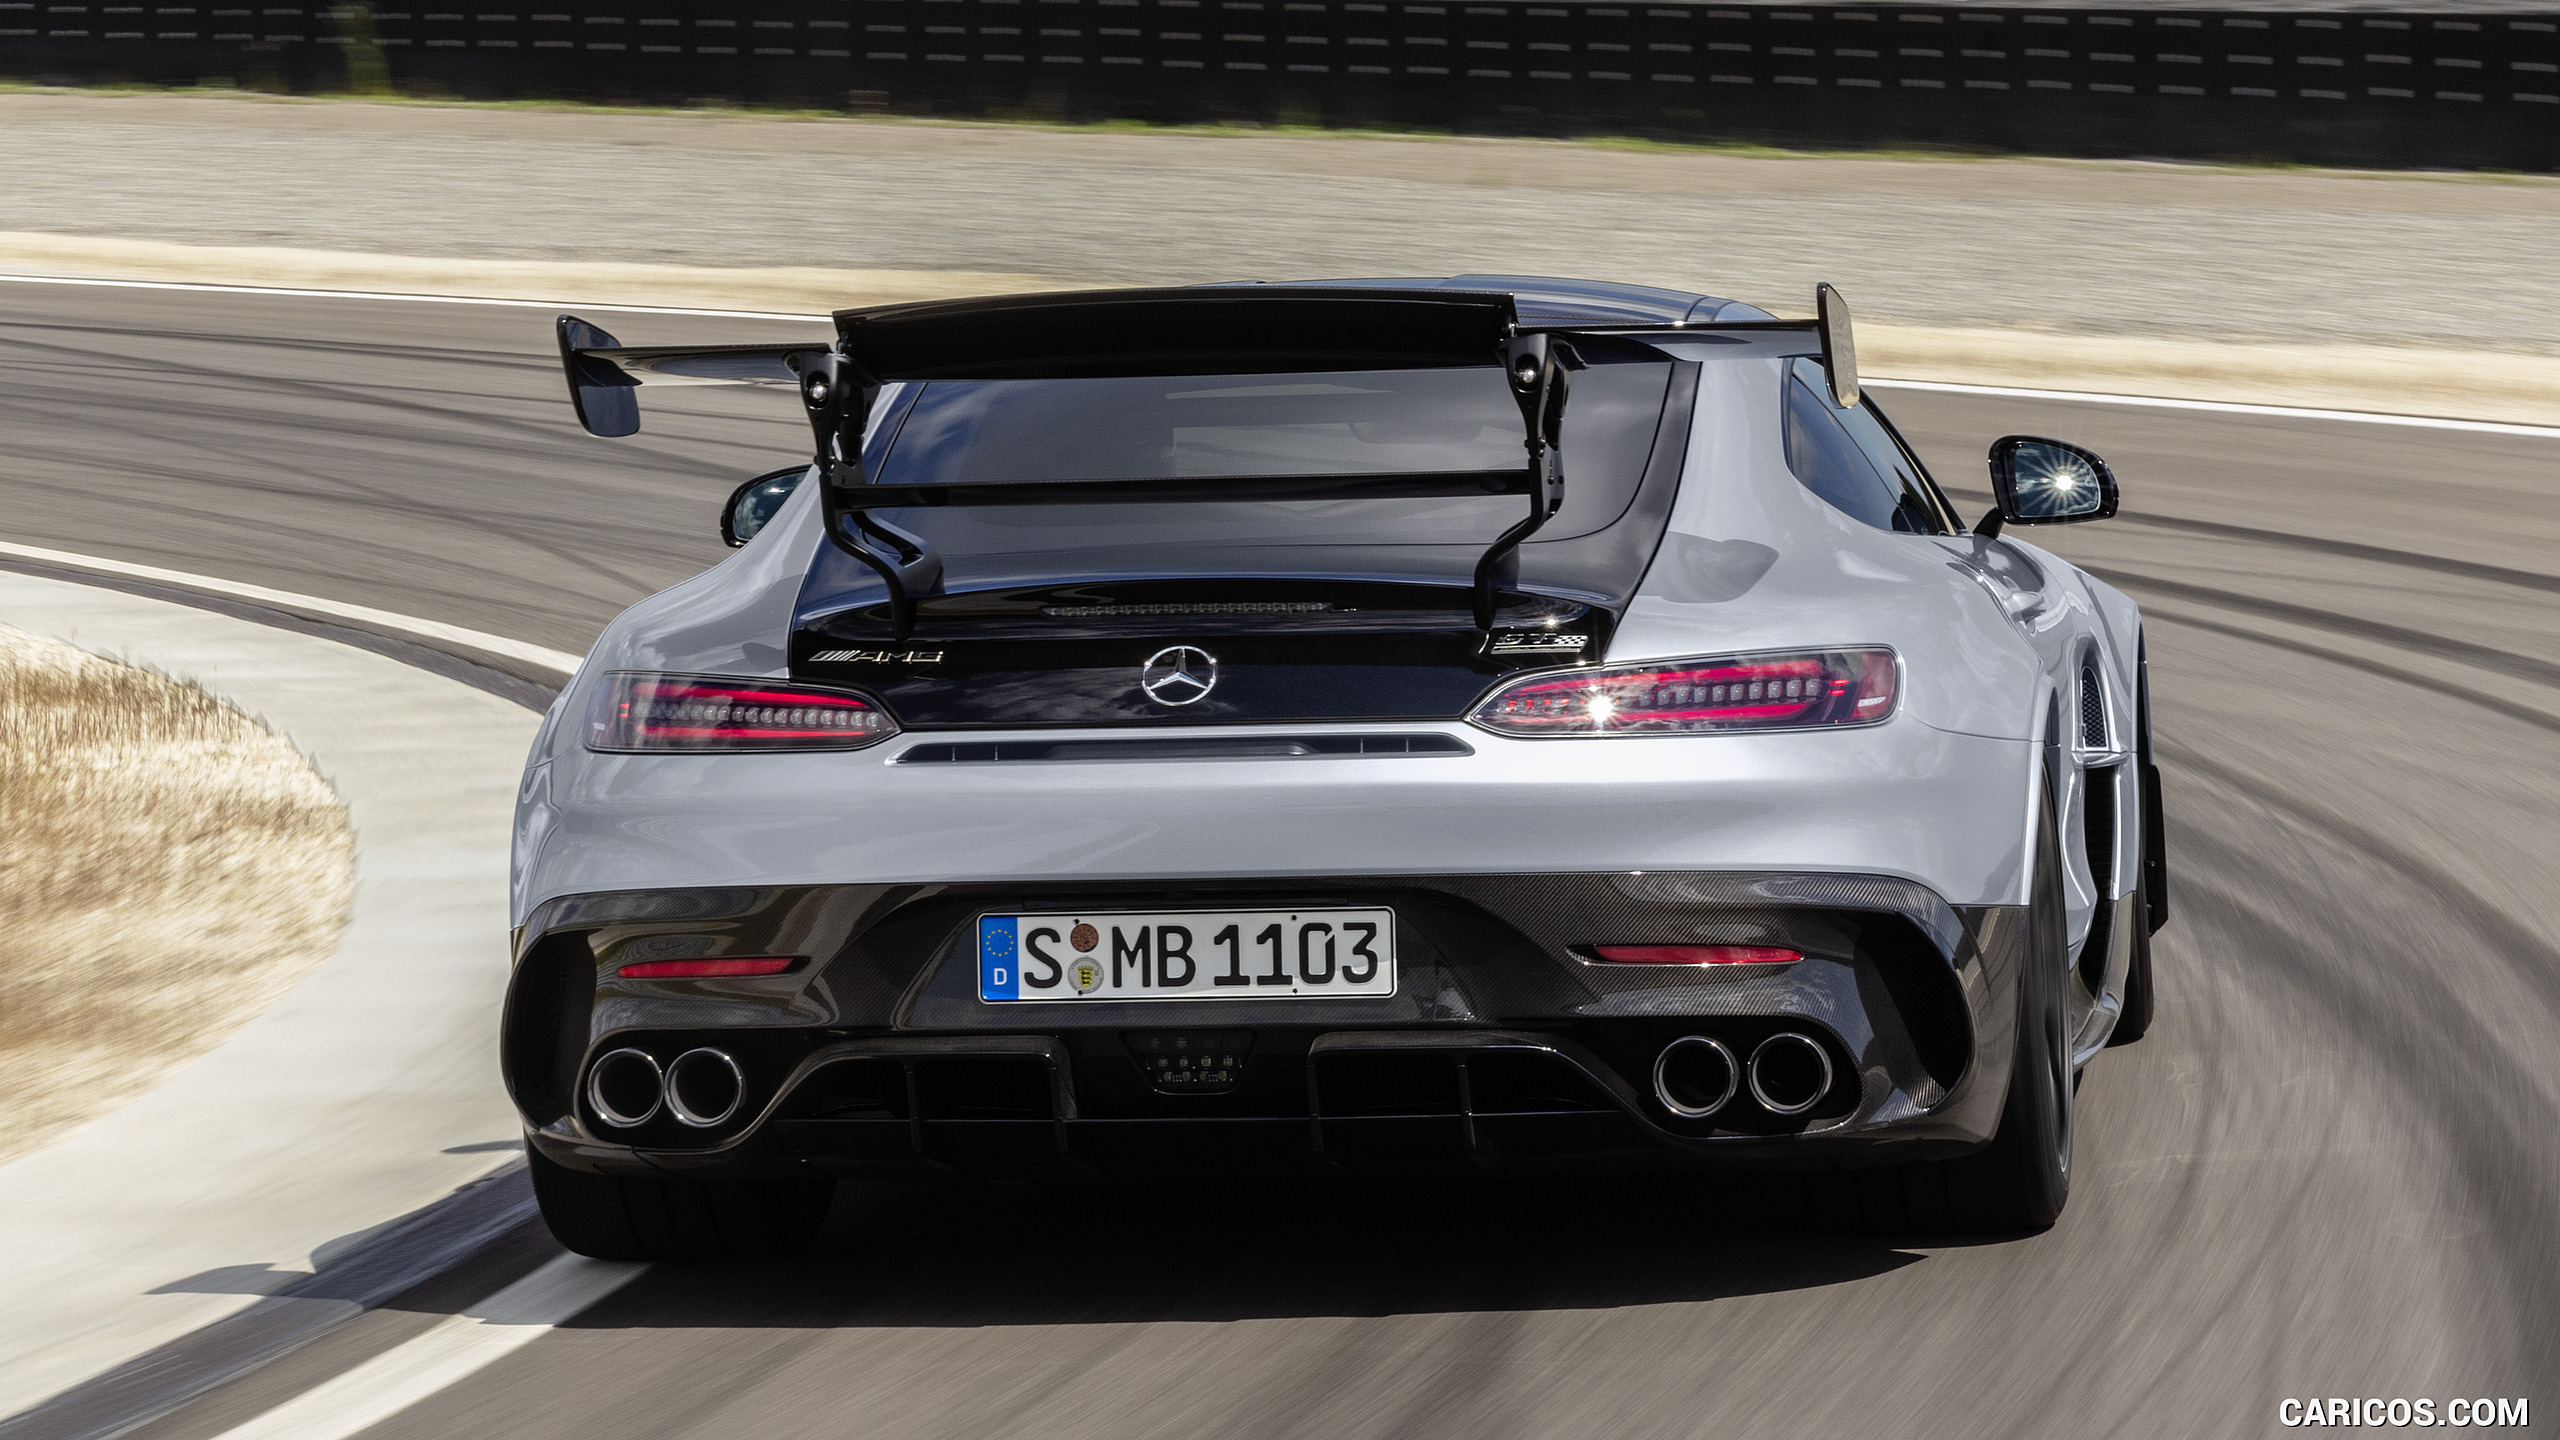 2021 Mercedes-AMG GT Black Series (Color: High Tech Silver) - Rear, #23 of 215